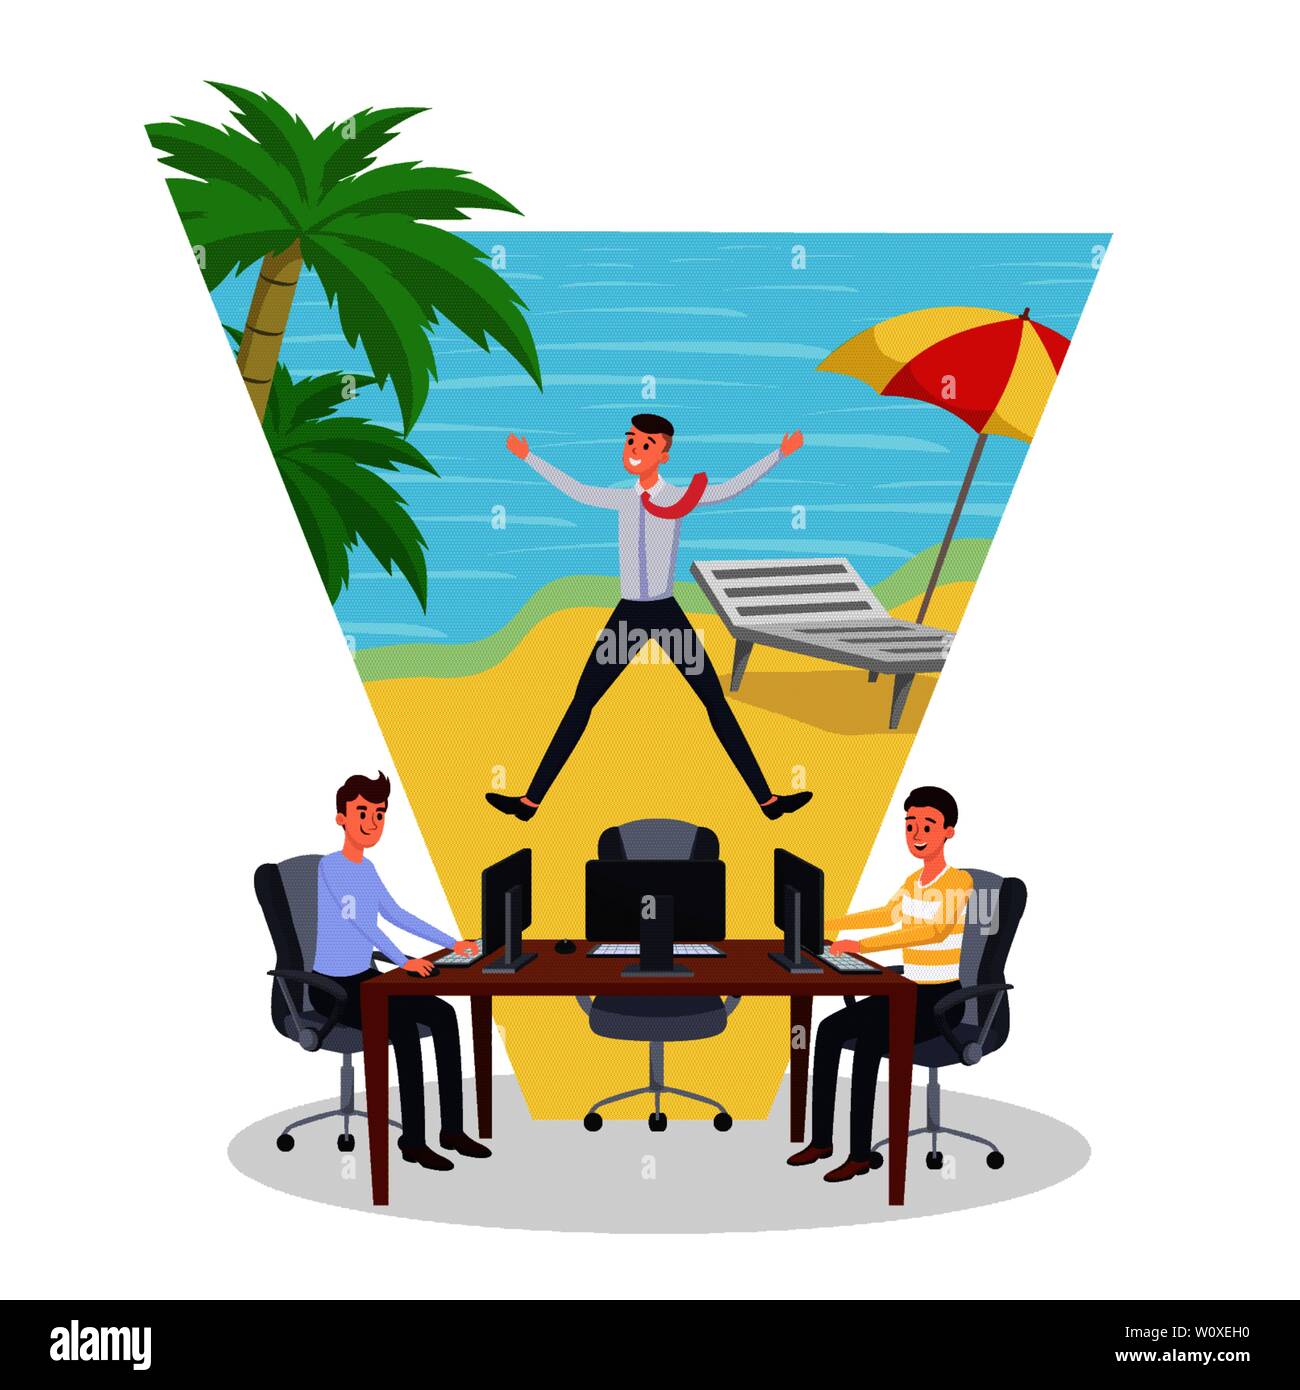 Dreaming about vacation flat vector illustration. Employees working while other worker on vacation cartoon characters. Man working and thinking about holidays on beach, office managers at workplace Stock Vector